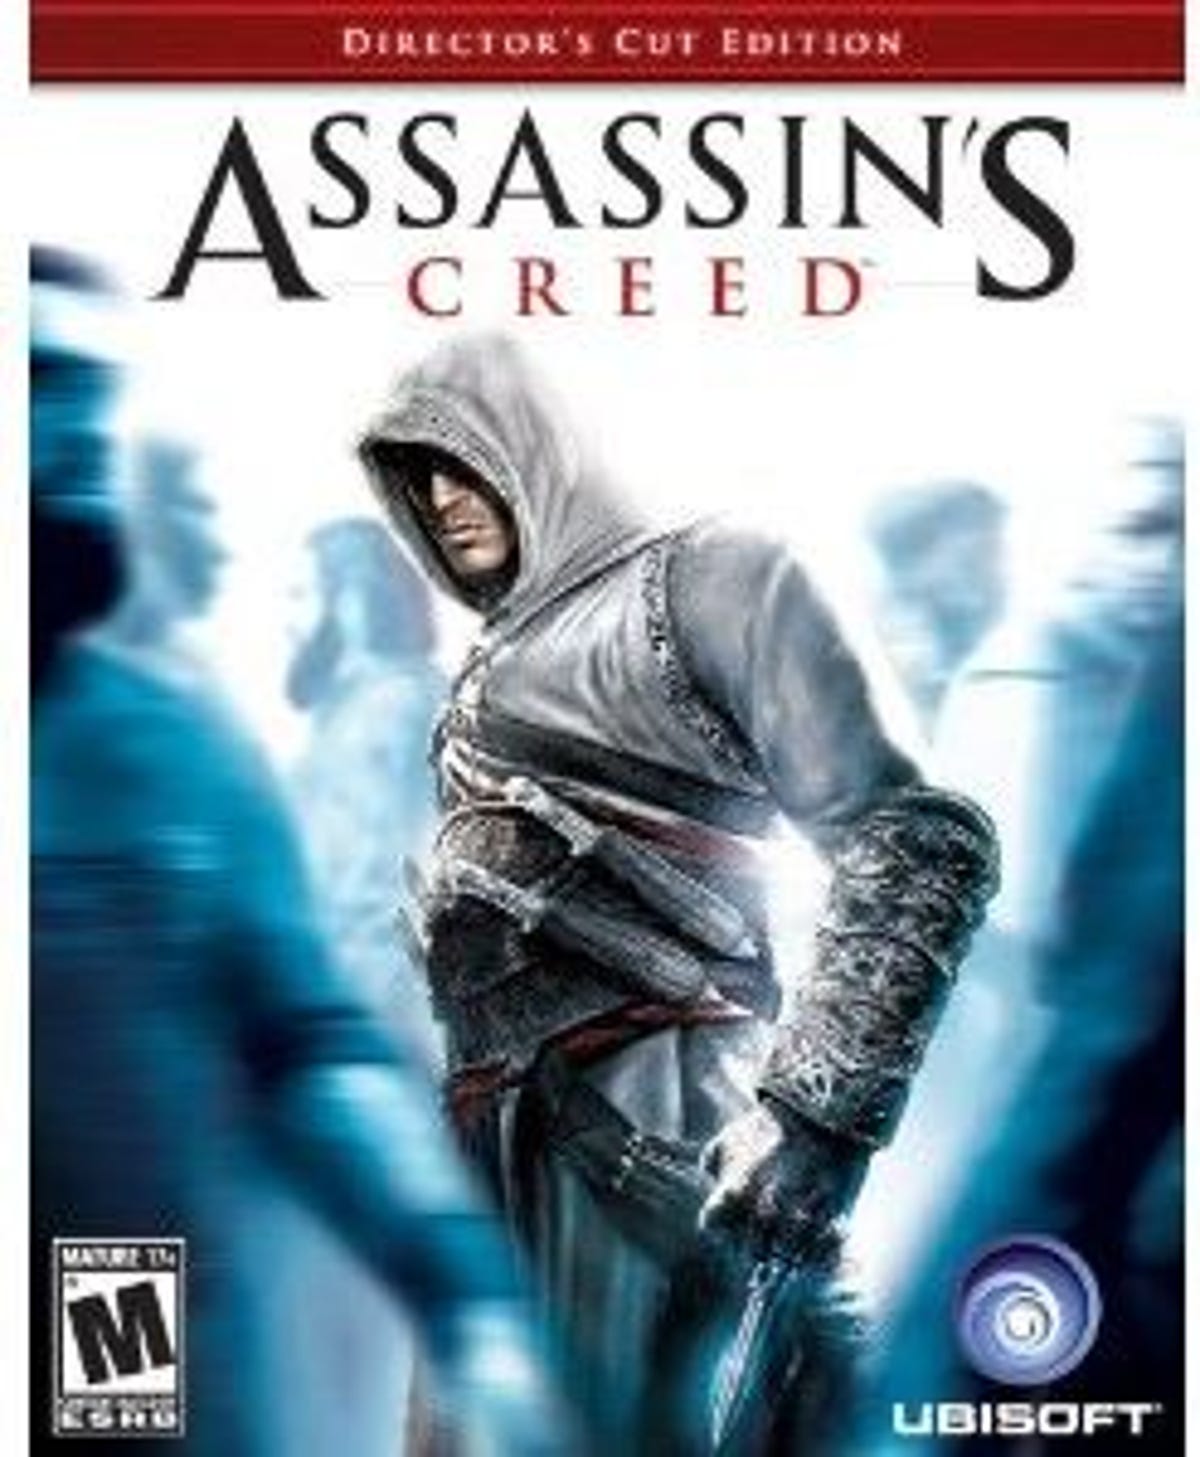 Assassin's Creed: Director's Cut Edition.